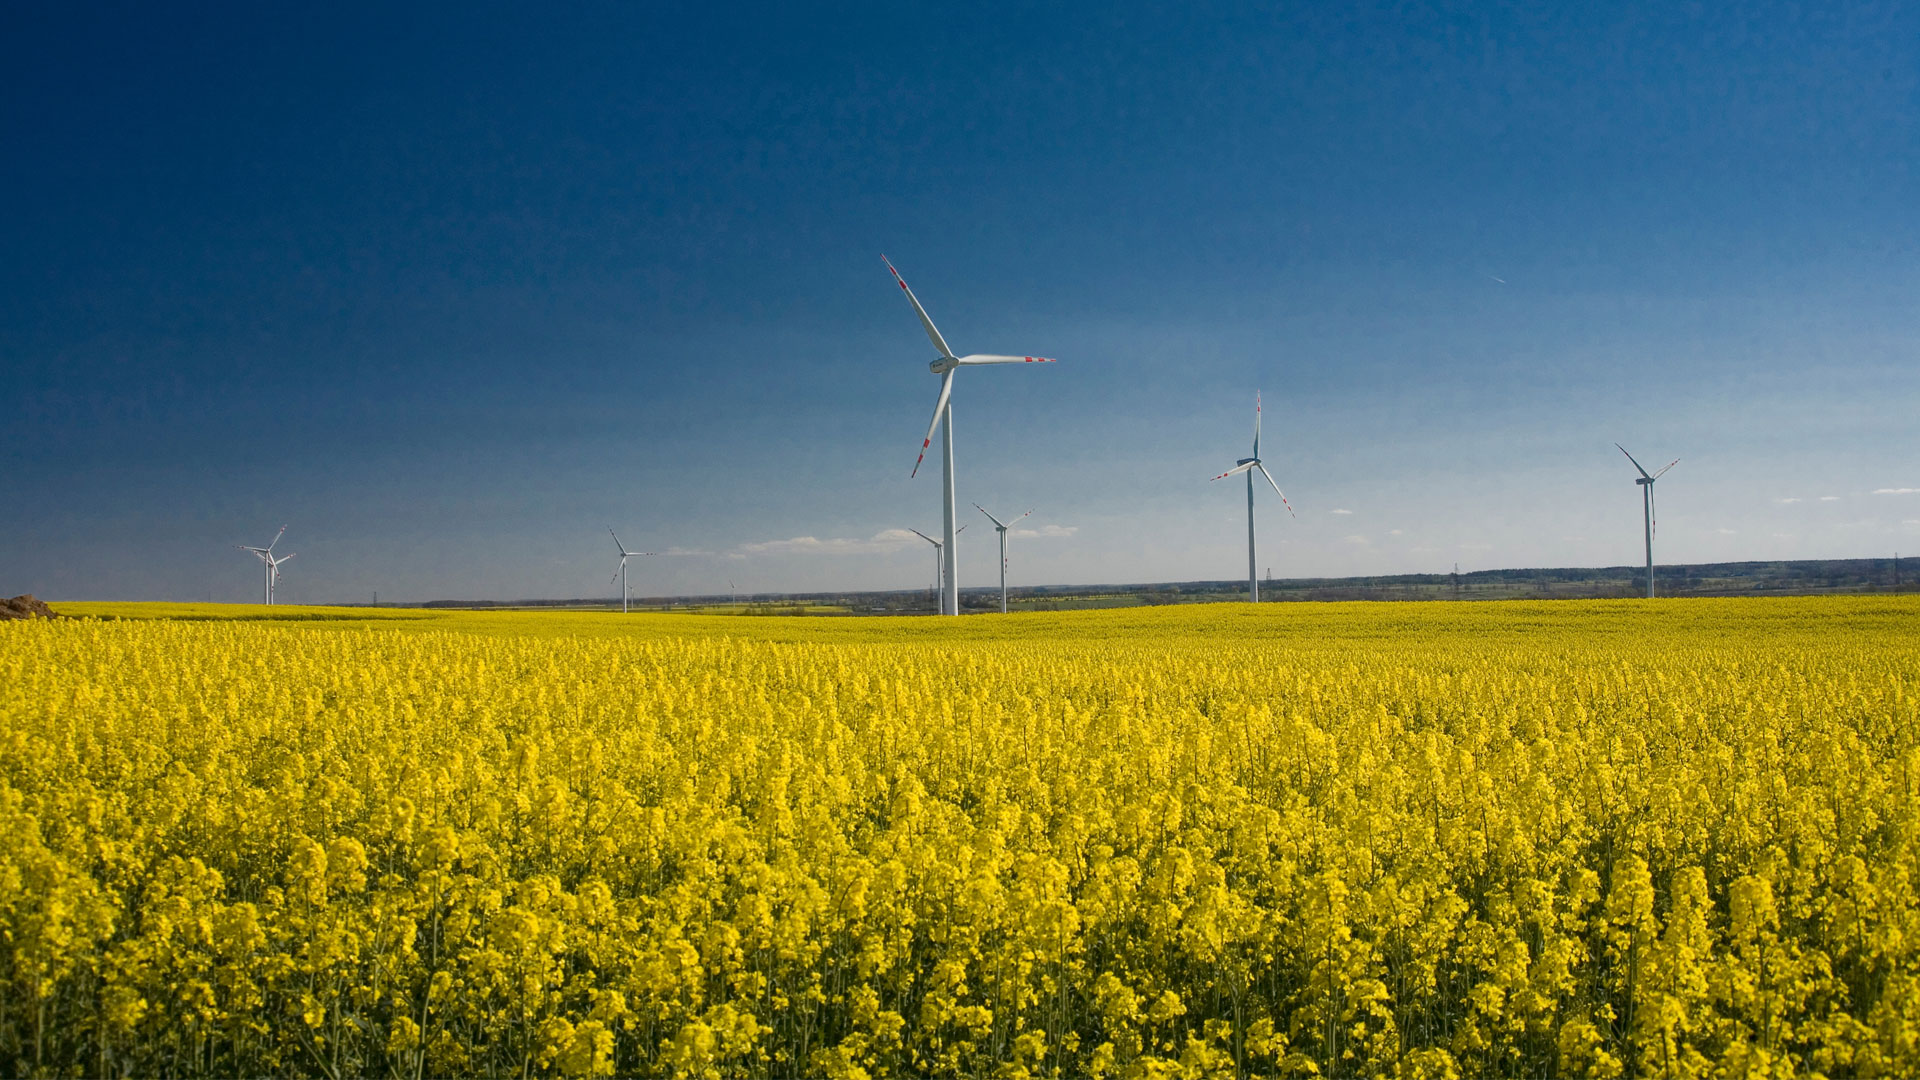 Wind turbines in the background of a field